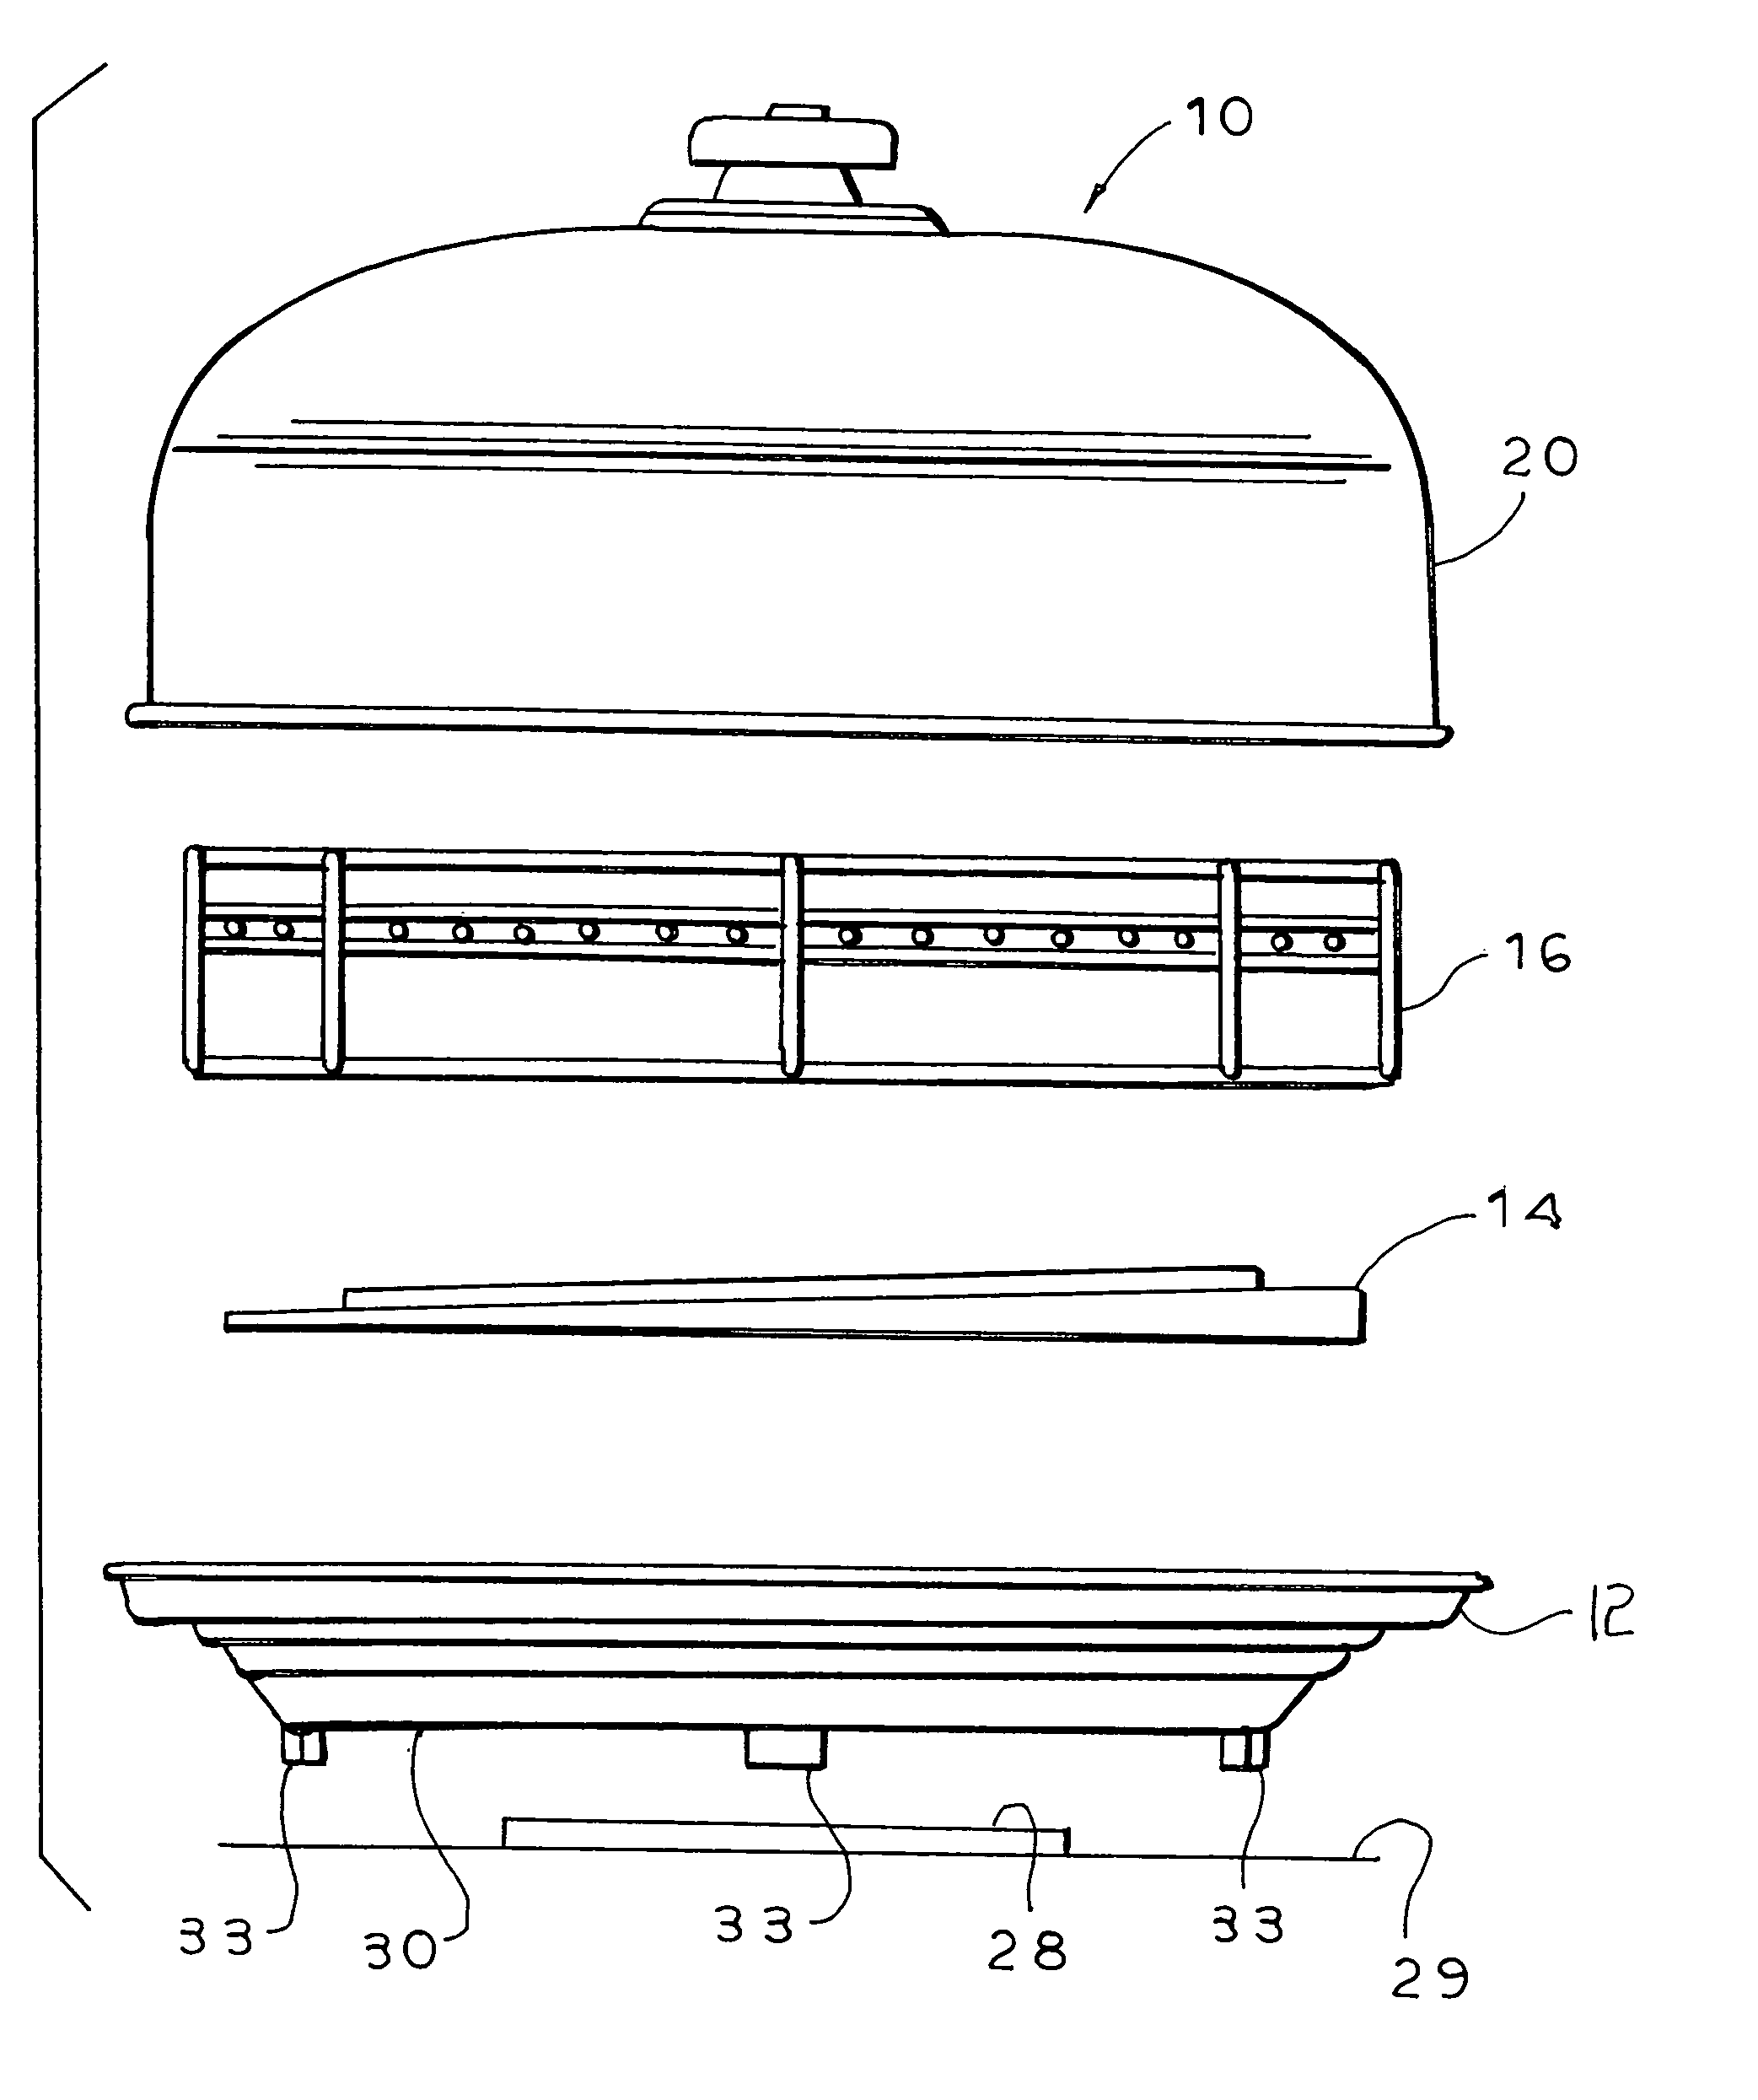 Multi-purpose stovetop grilling and cooking device